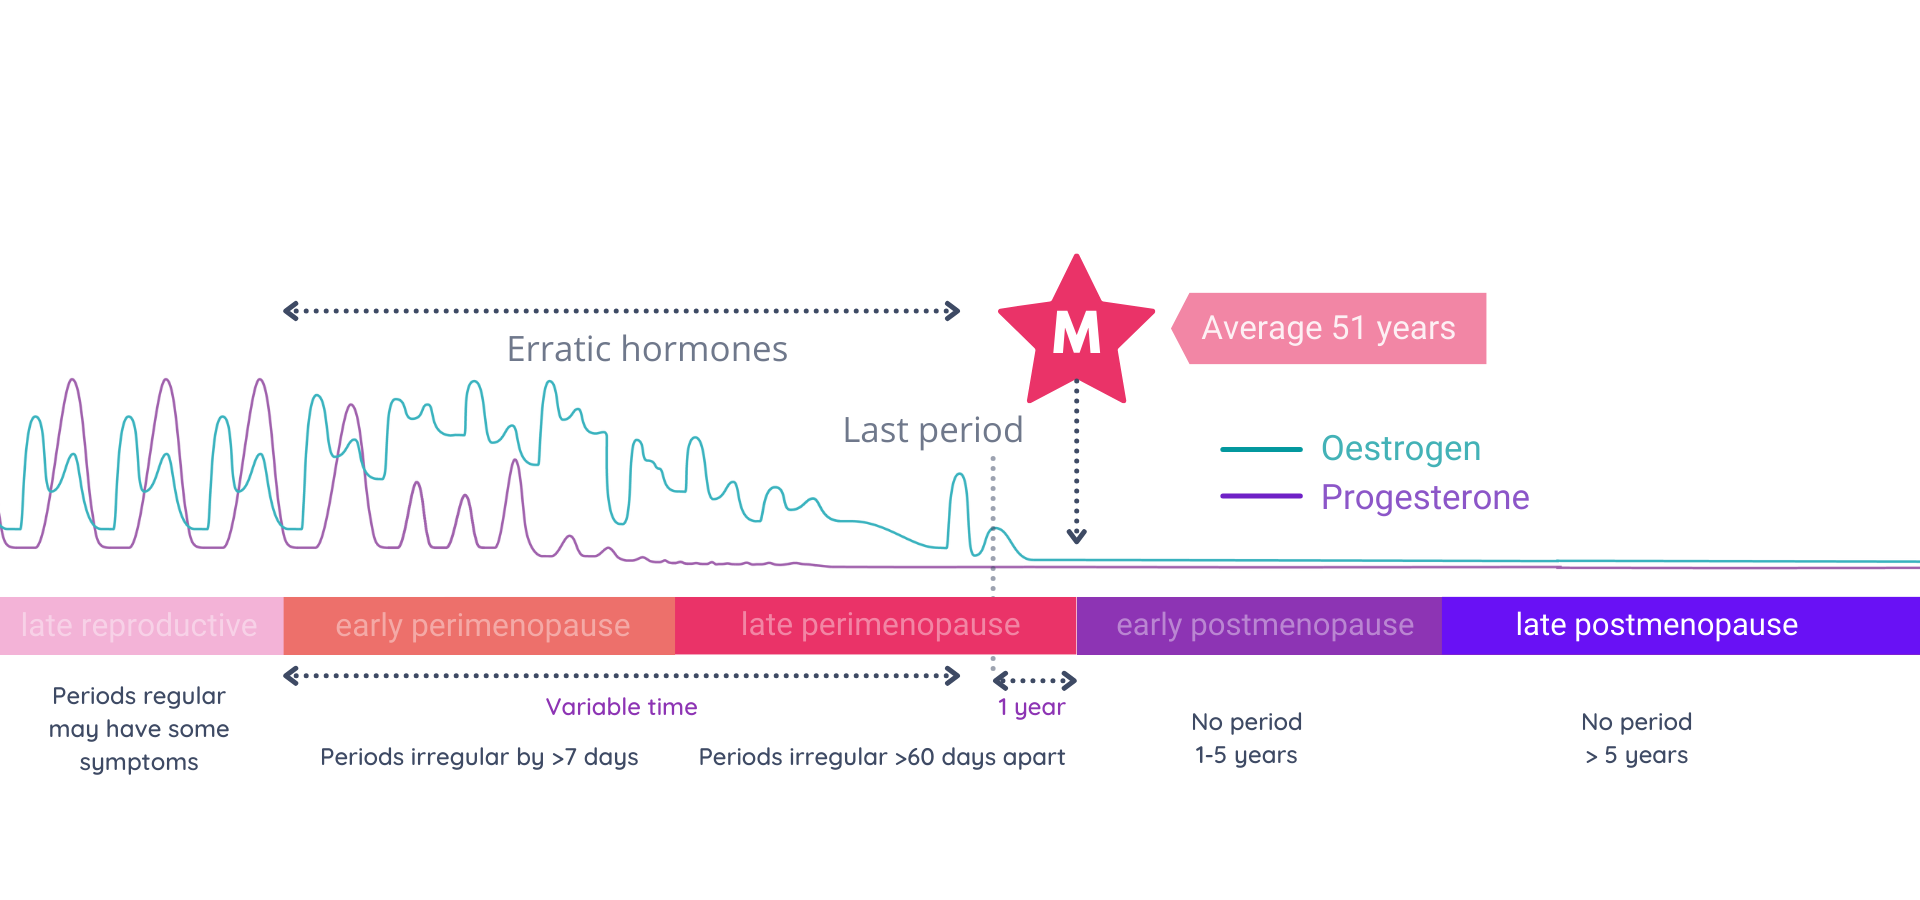 When A Period Is Very Late (Post-Menopause)